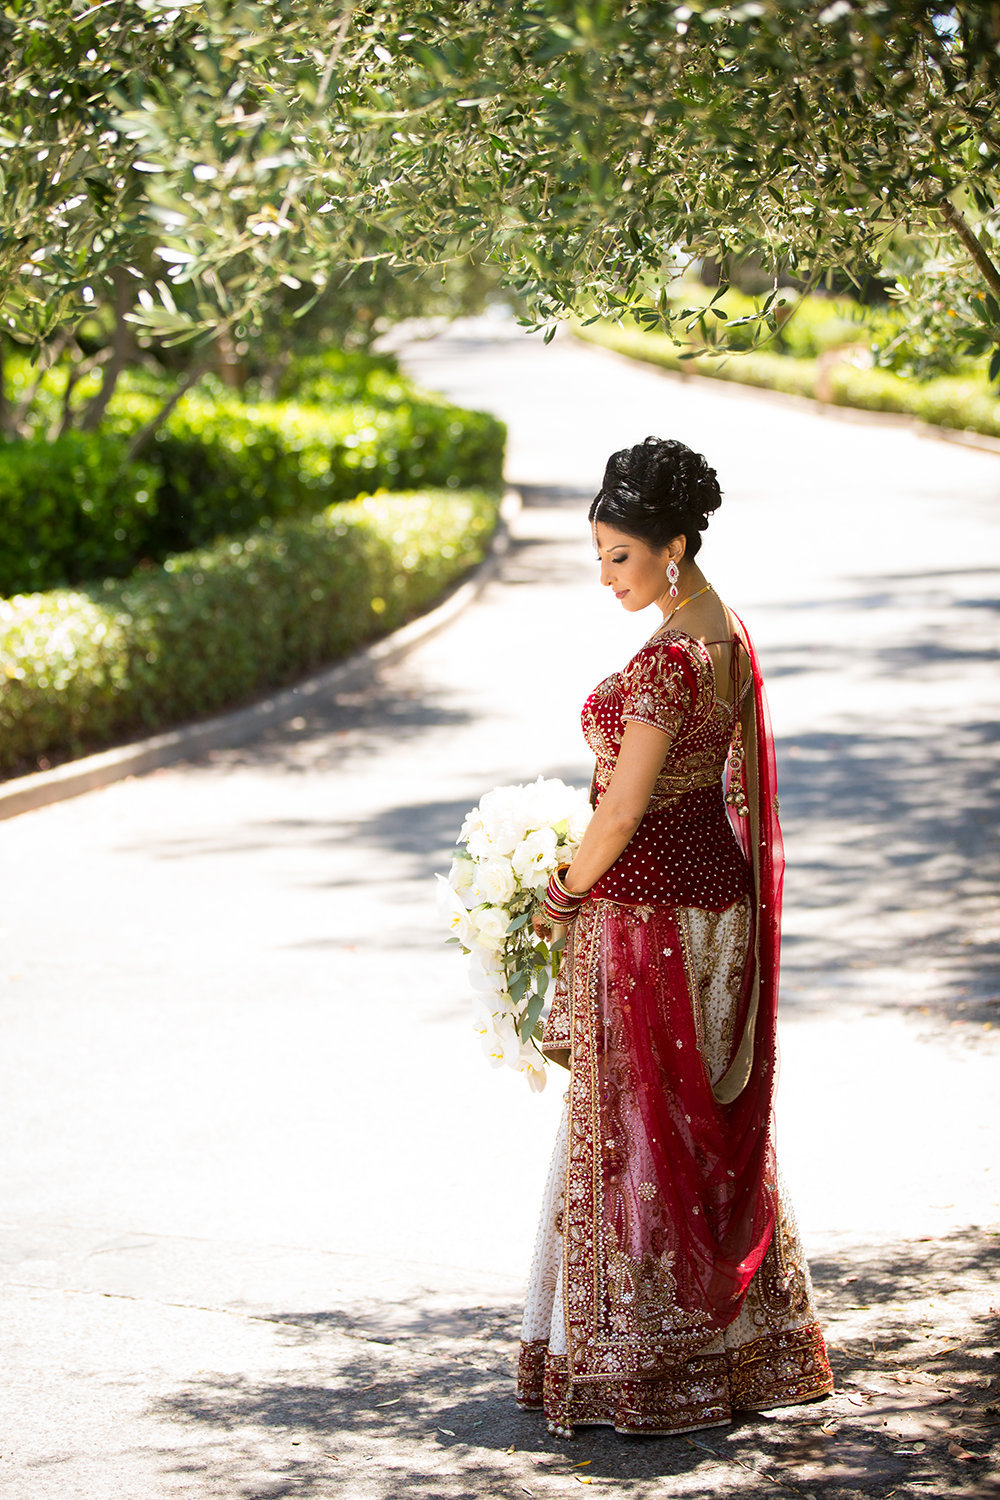 Peaceful moment with bride in beautiful red sari